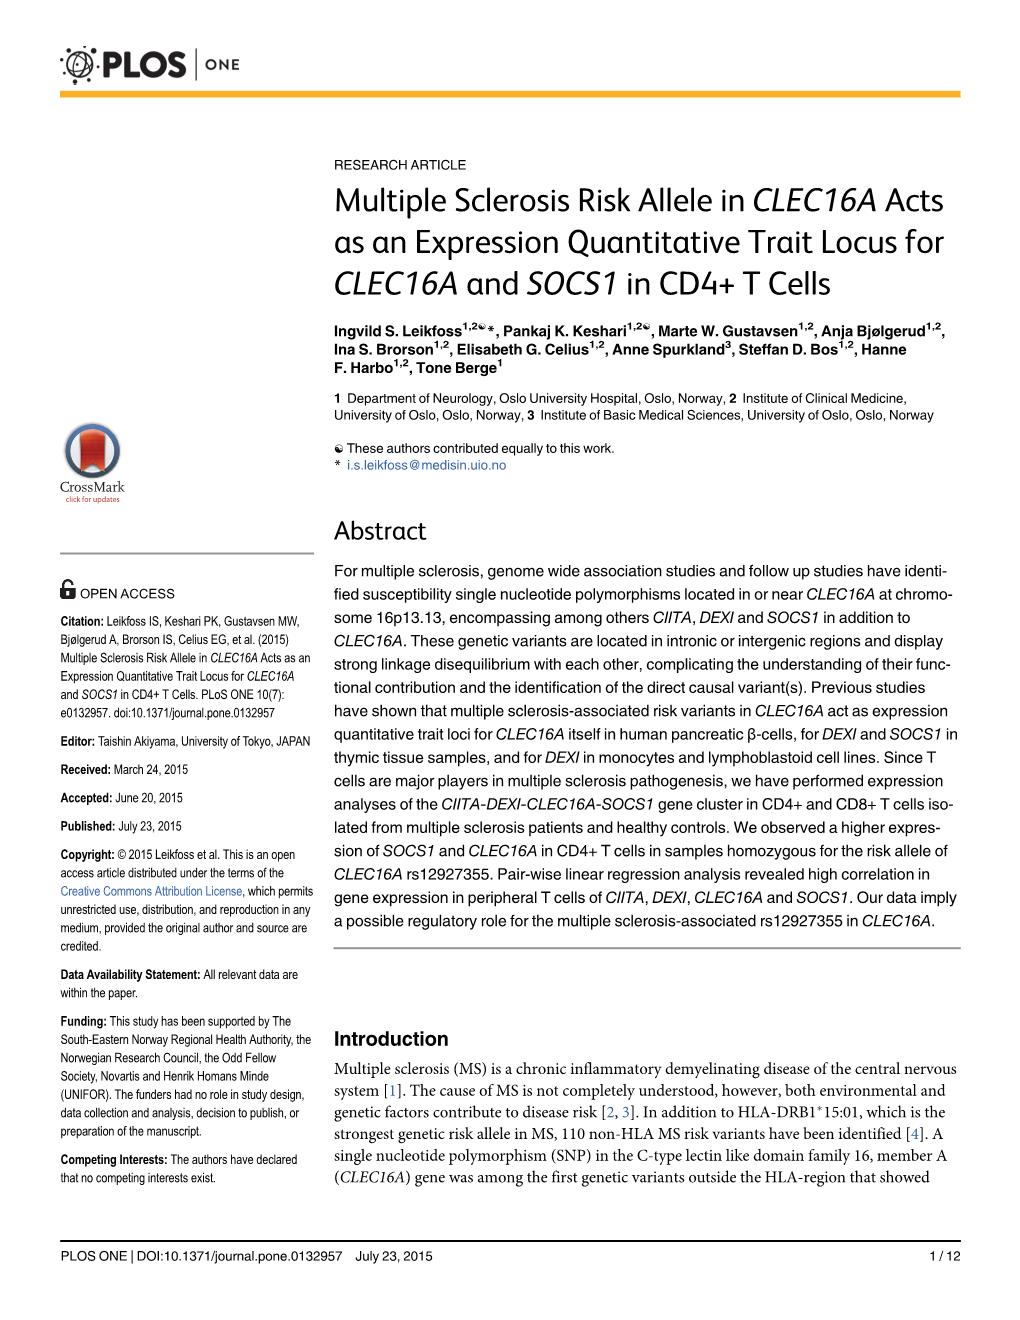 Multiple Sclerosis Risk Allele in CLEC16A Acts As an Expression Quantitative Trait Locus for CLEC16A and SOCS1 in CD4+ T Cells